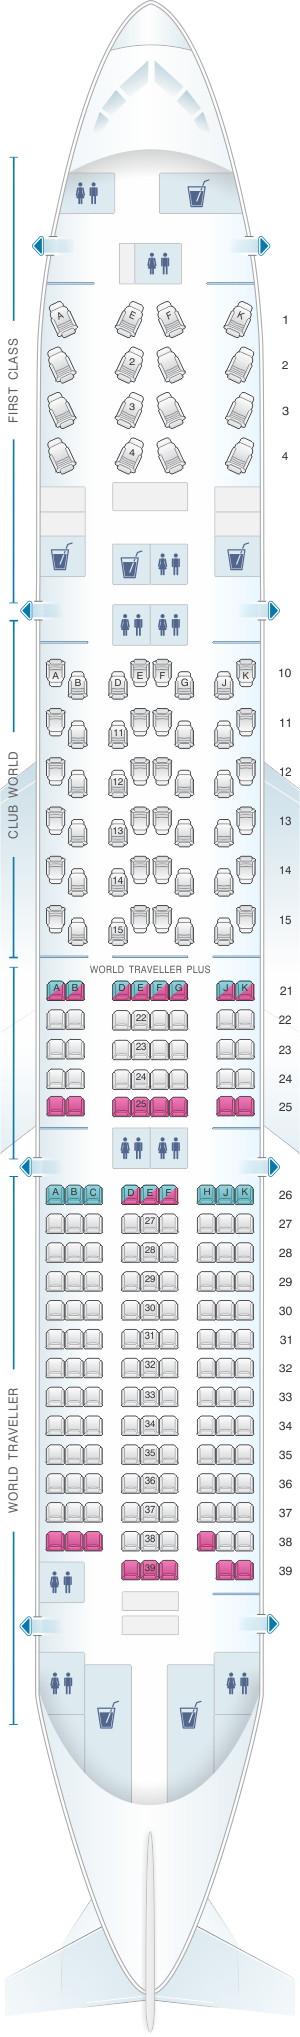 Seat map for British Airways Boeing B777 200 four class